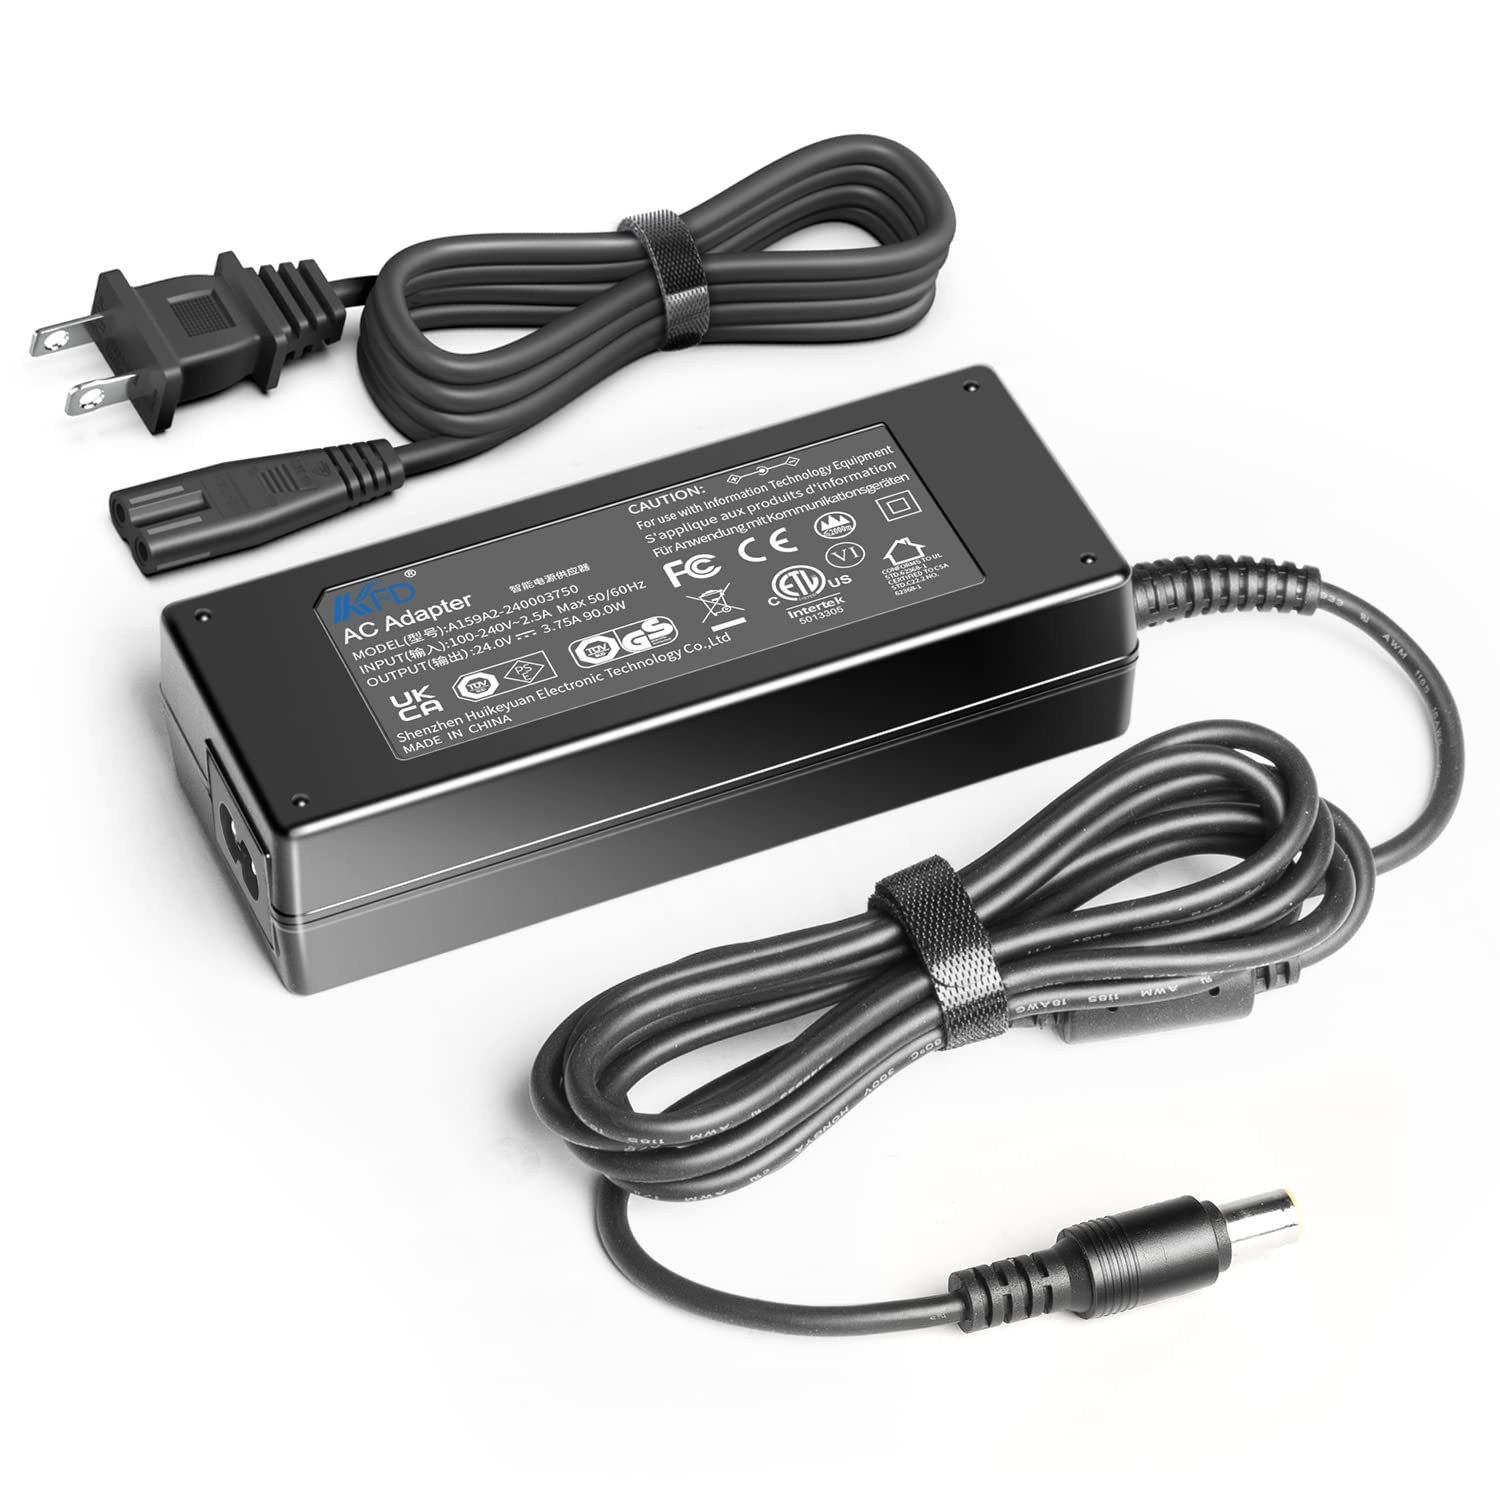 for Jackery Charger, KFD AC Adapter for Jackery Portable Power Station Explorer 240 300 500 550 E240 E300 E500 G0500A0500AH-2 293/518Wh 300W 500W Lithium-ion Battery Charger 24V 3.75A 90W Power Supply